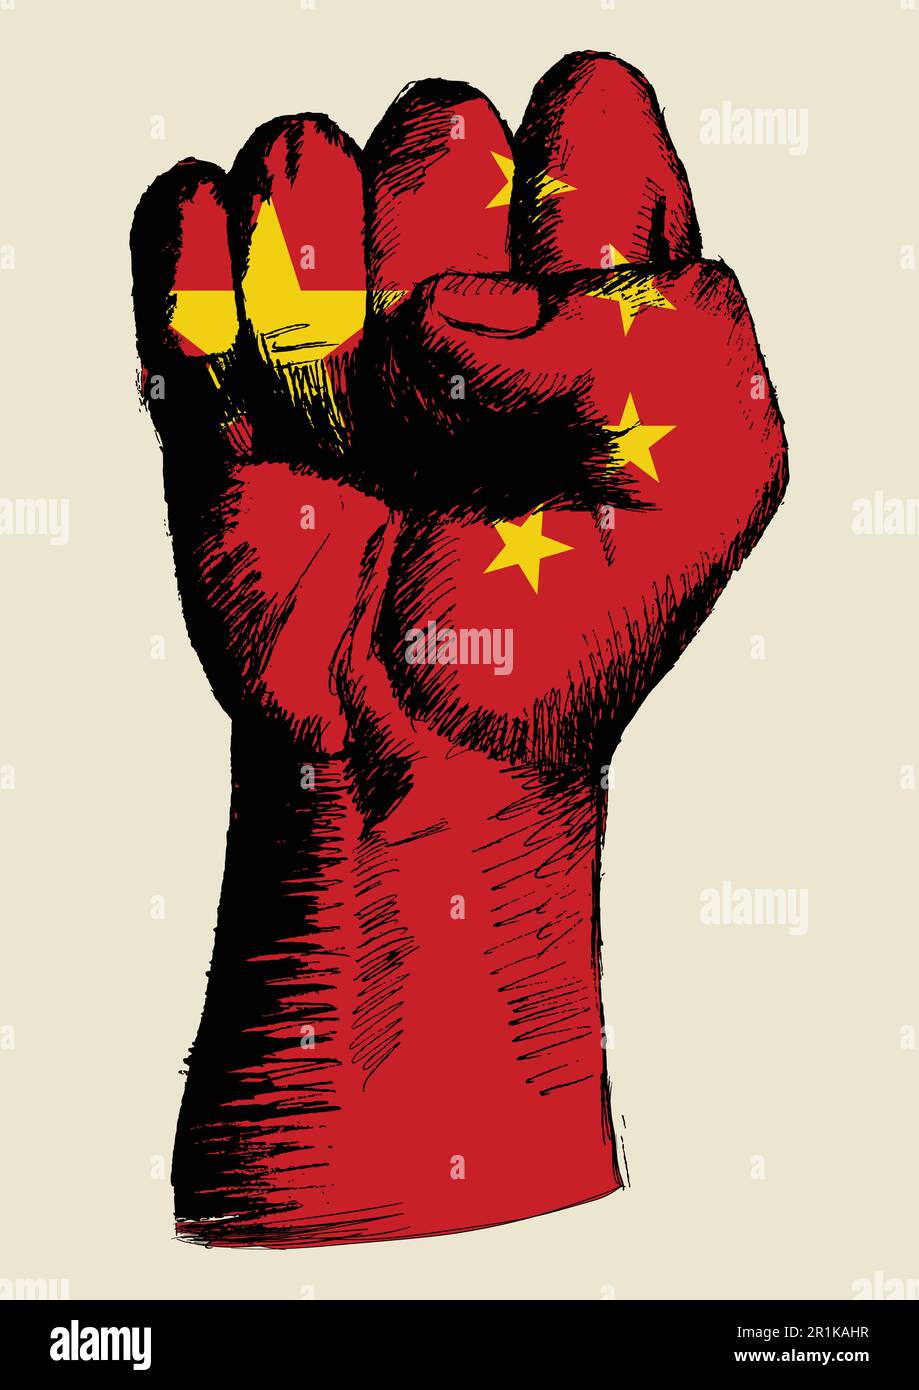 Sketch illustration of a fist with People's Republic of China insignia Stock Vector